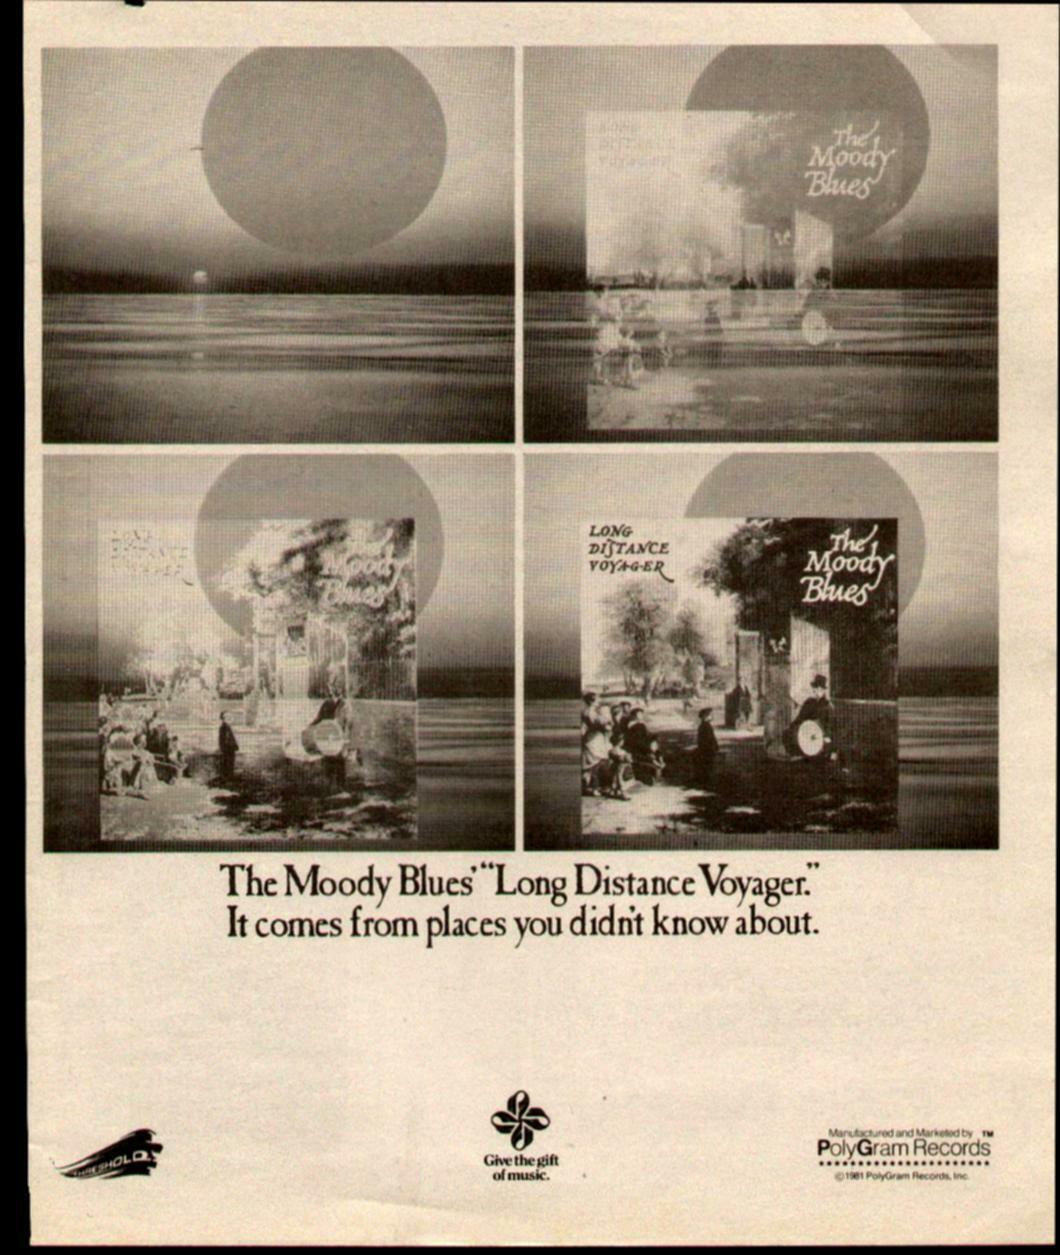 1981 Moody Blues "long Distance Voyager" Album Promo Ad